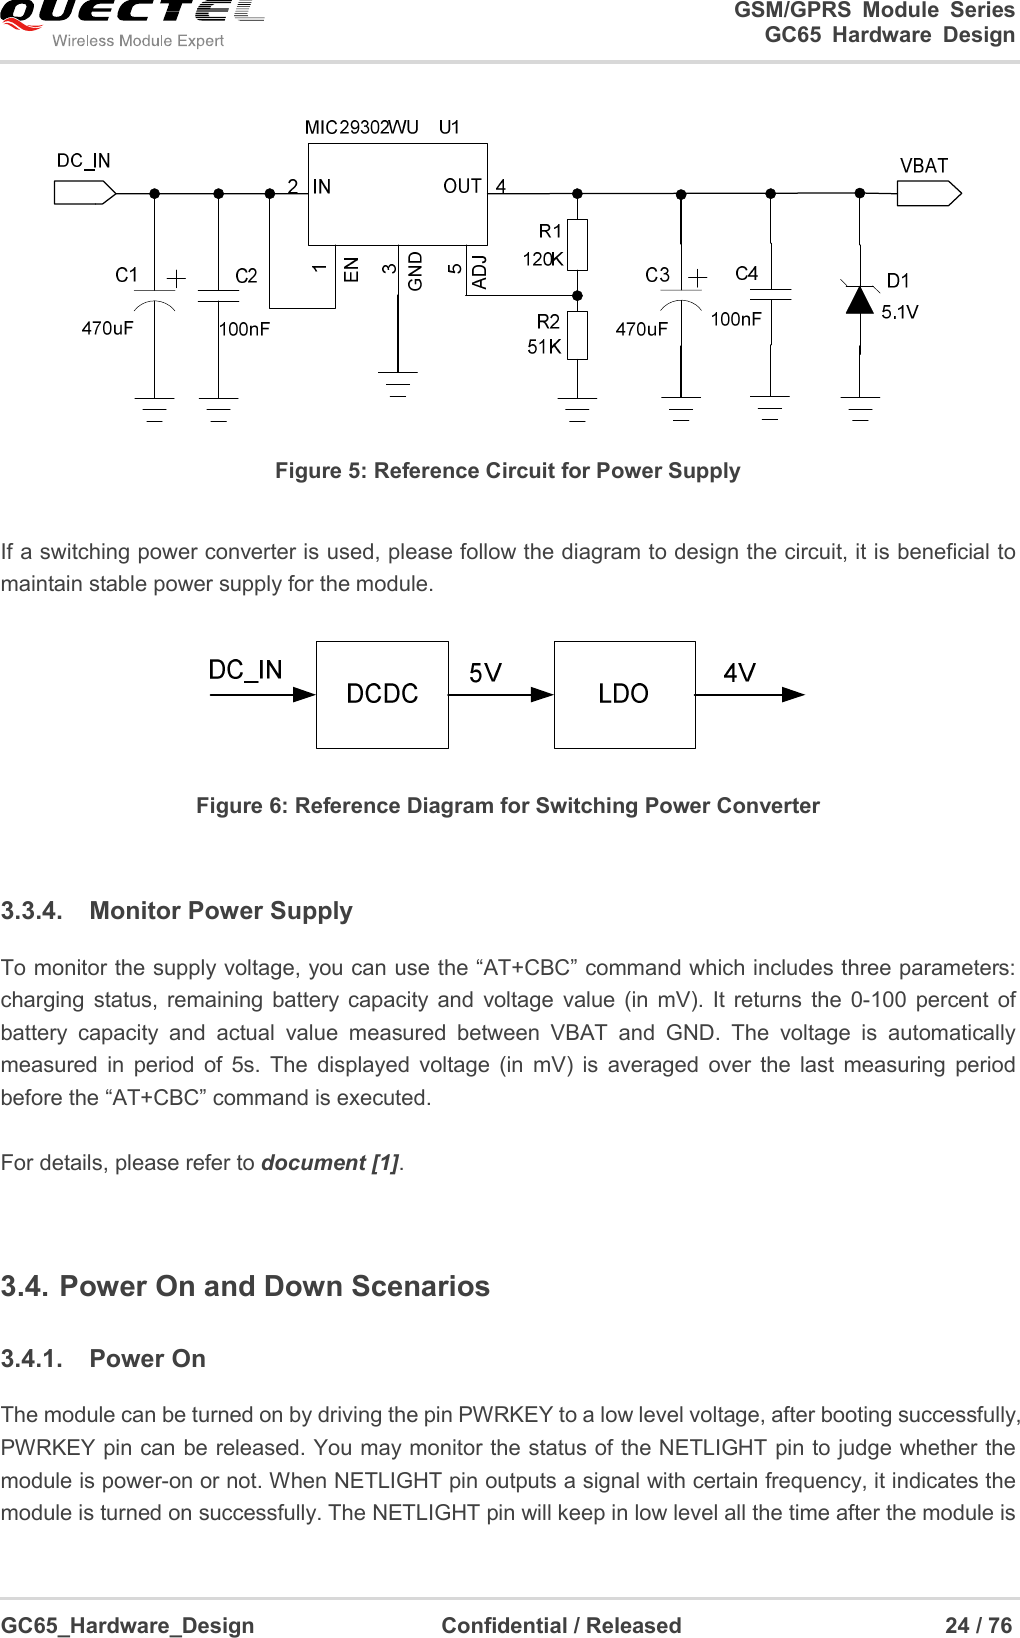                                                                          GSM/GPRS  Module  Series                                                                 GC65 Hardware Design  GC65_Hardware_Design                                  Confidential / Released                                                24 / 76       Figure 5: Reference Circuit for Power Supply  If a switching power converter is used, please follow the diagram to design the circuit, it is beneficial to maintain stable power supply for the module.  Figure 6: Reference Diagram for Switching Power Converter  3.3.4.  Monitor Power Supply To monitor the supply voltage, you can use the “AT+CBC” command which includes three parameters: charging  status, remaining  battery capacity  and  voltage  value  (in  mV).  It  returns  the  0-100  percent  of battery  capacity  and  actual  value  measured  between  VBAT  and  GND.  The  voltage  is  automatically measured  in  period  of  5s.  The  displayed  voltage  (in  mV)  is  averaged  over  the  last  measuring  period before the “AT+CBC” command is executed.  For details, please refer to document [1].  3.4. Power On and Down Scenarios 3.4.1.  Power On The module can be turned on by driving the pin PWRKEY to a low level voltage, after booting successfully, PWRKEY pin can be released. You may monitor the status of the NETLIGHT pin to judge whether the module is power-on or not. When NETLIGHT pin outputs a signal with certain frequency, it indicates the module is turned on successfully. The NETLIGHT pin will keep in low level all the time after the module is 